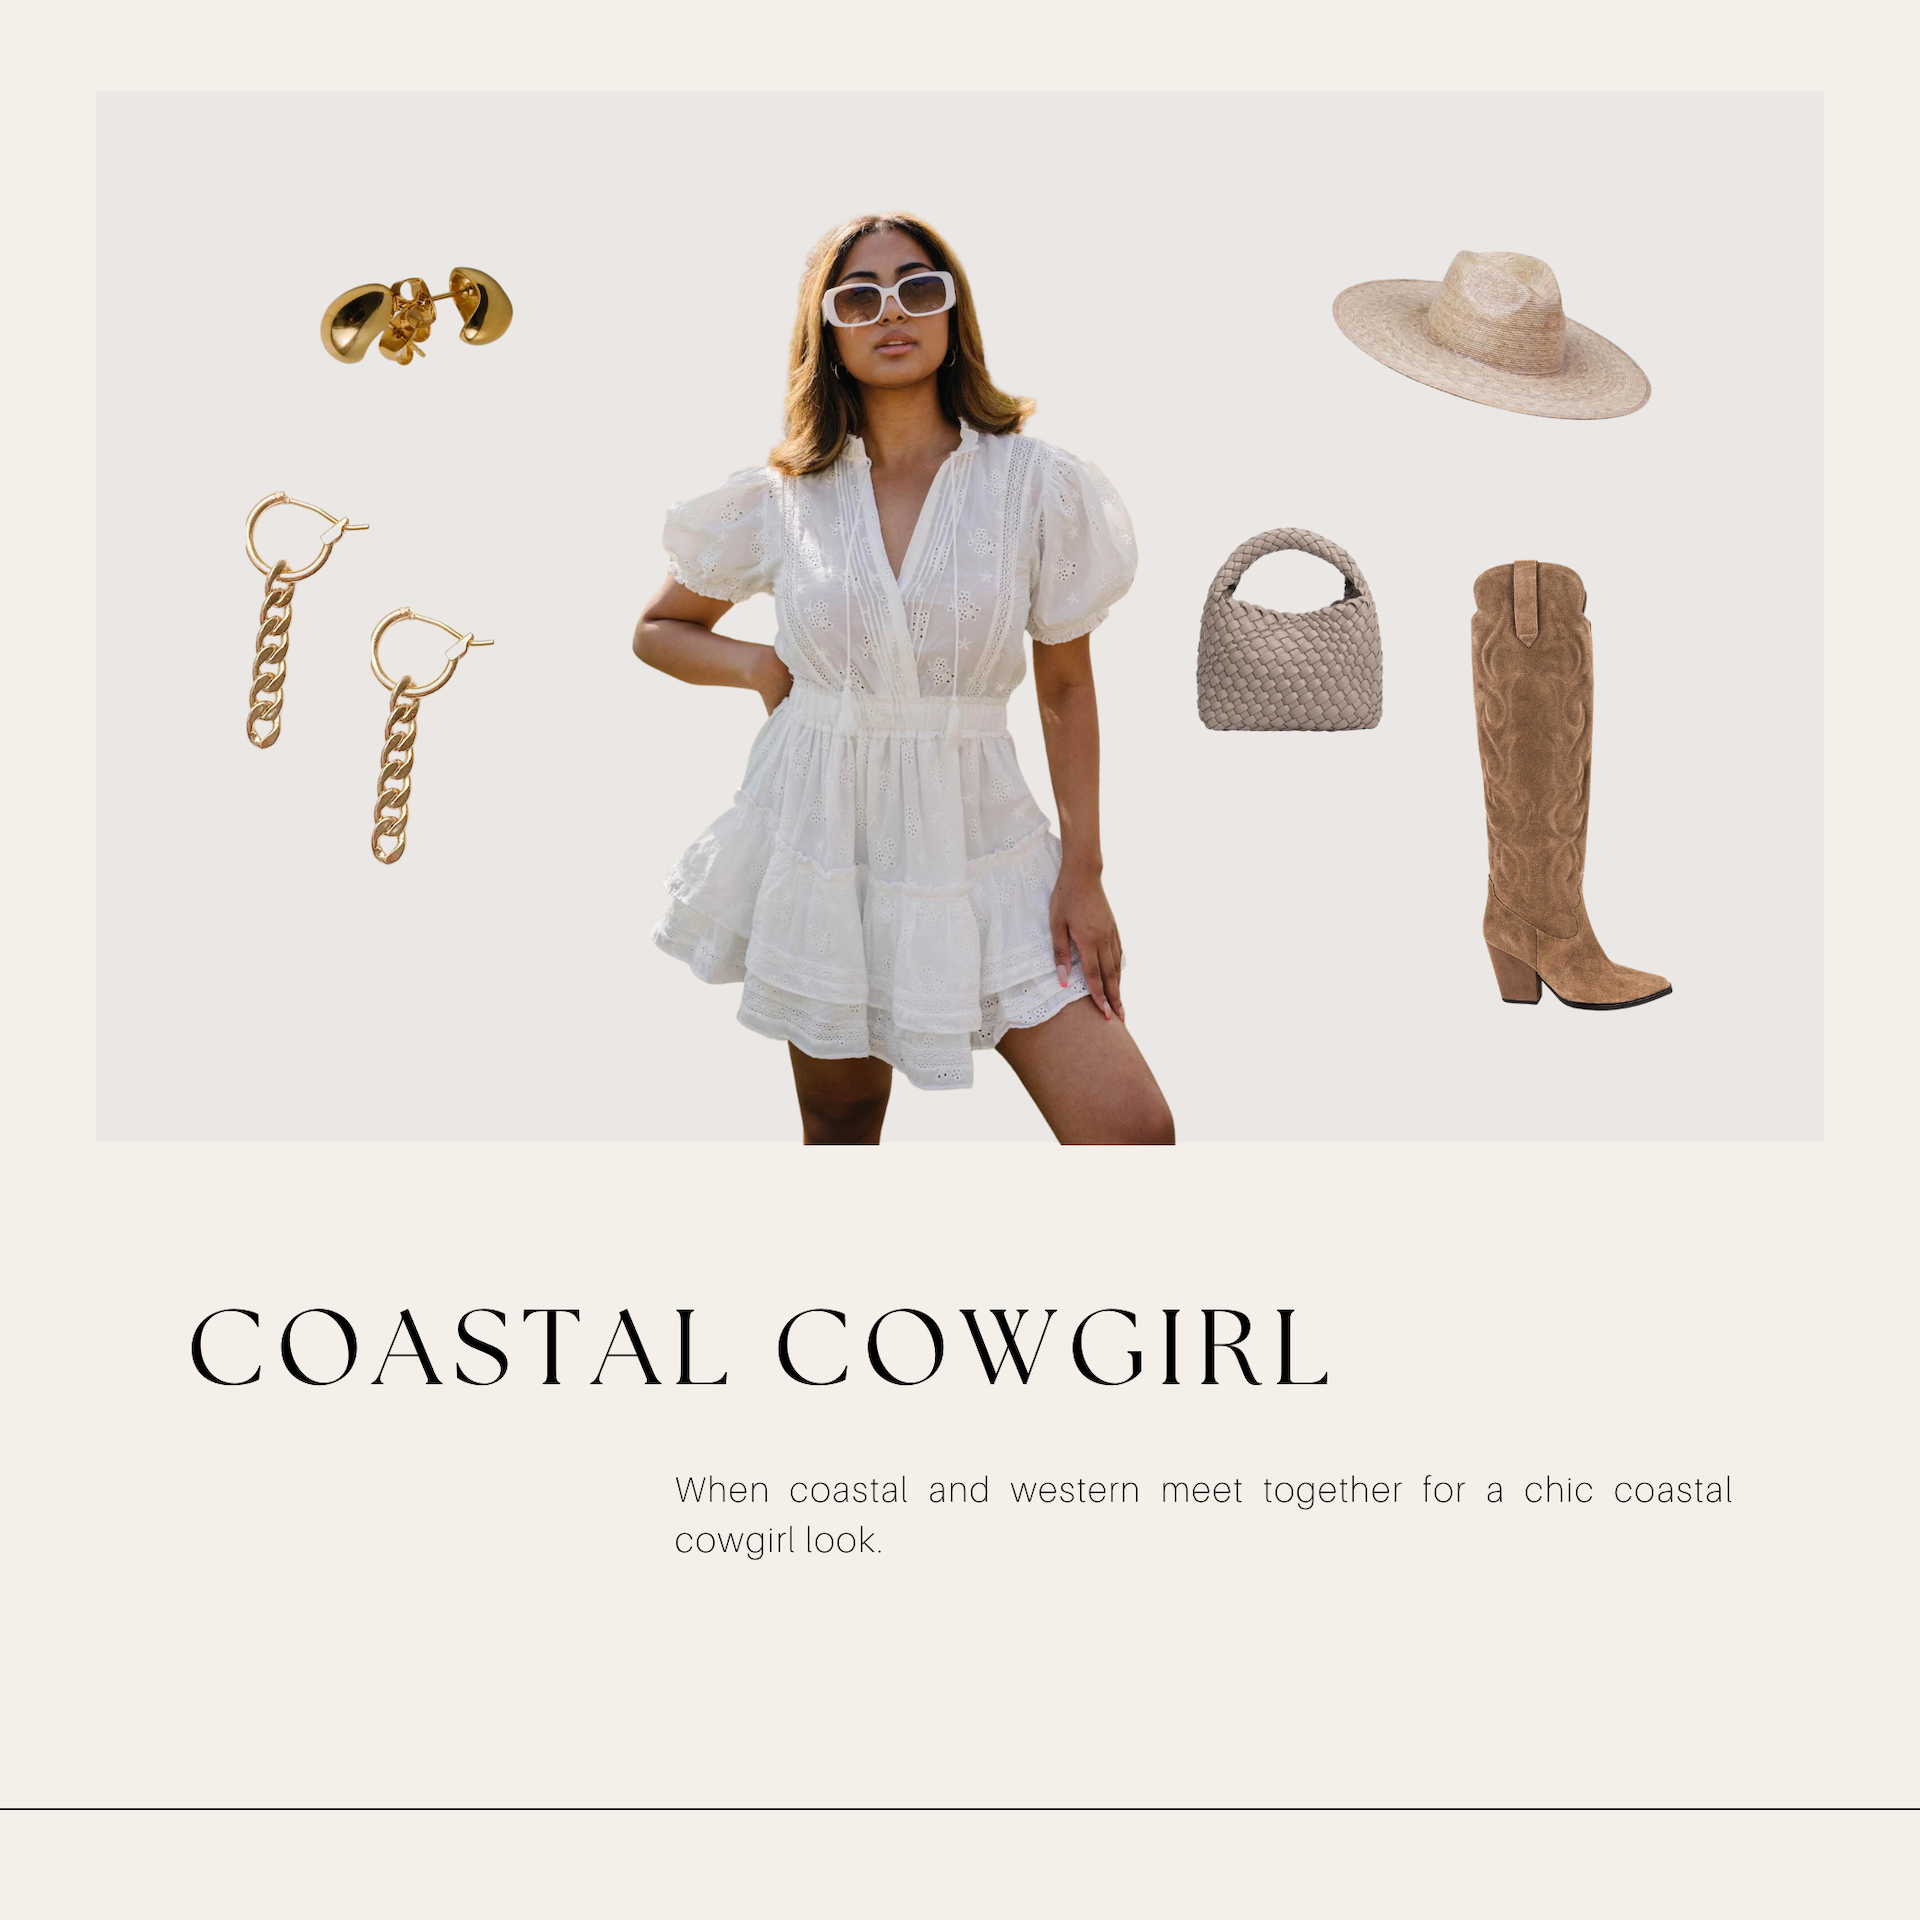 Coastal Cowgirl Aesthetic: The Trend Alert of the Season